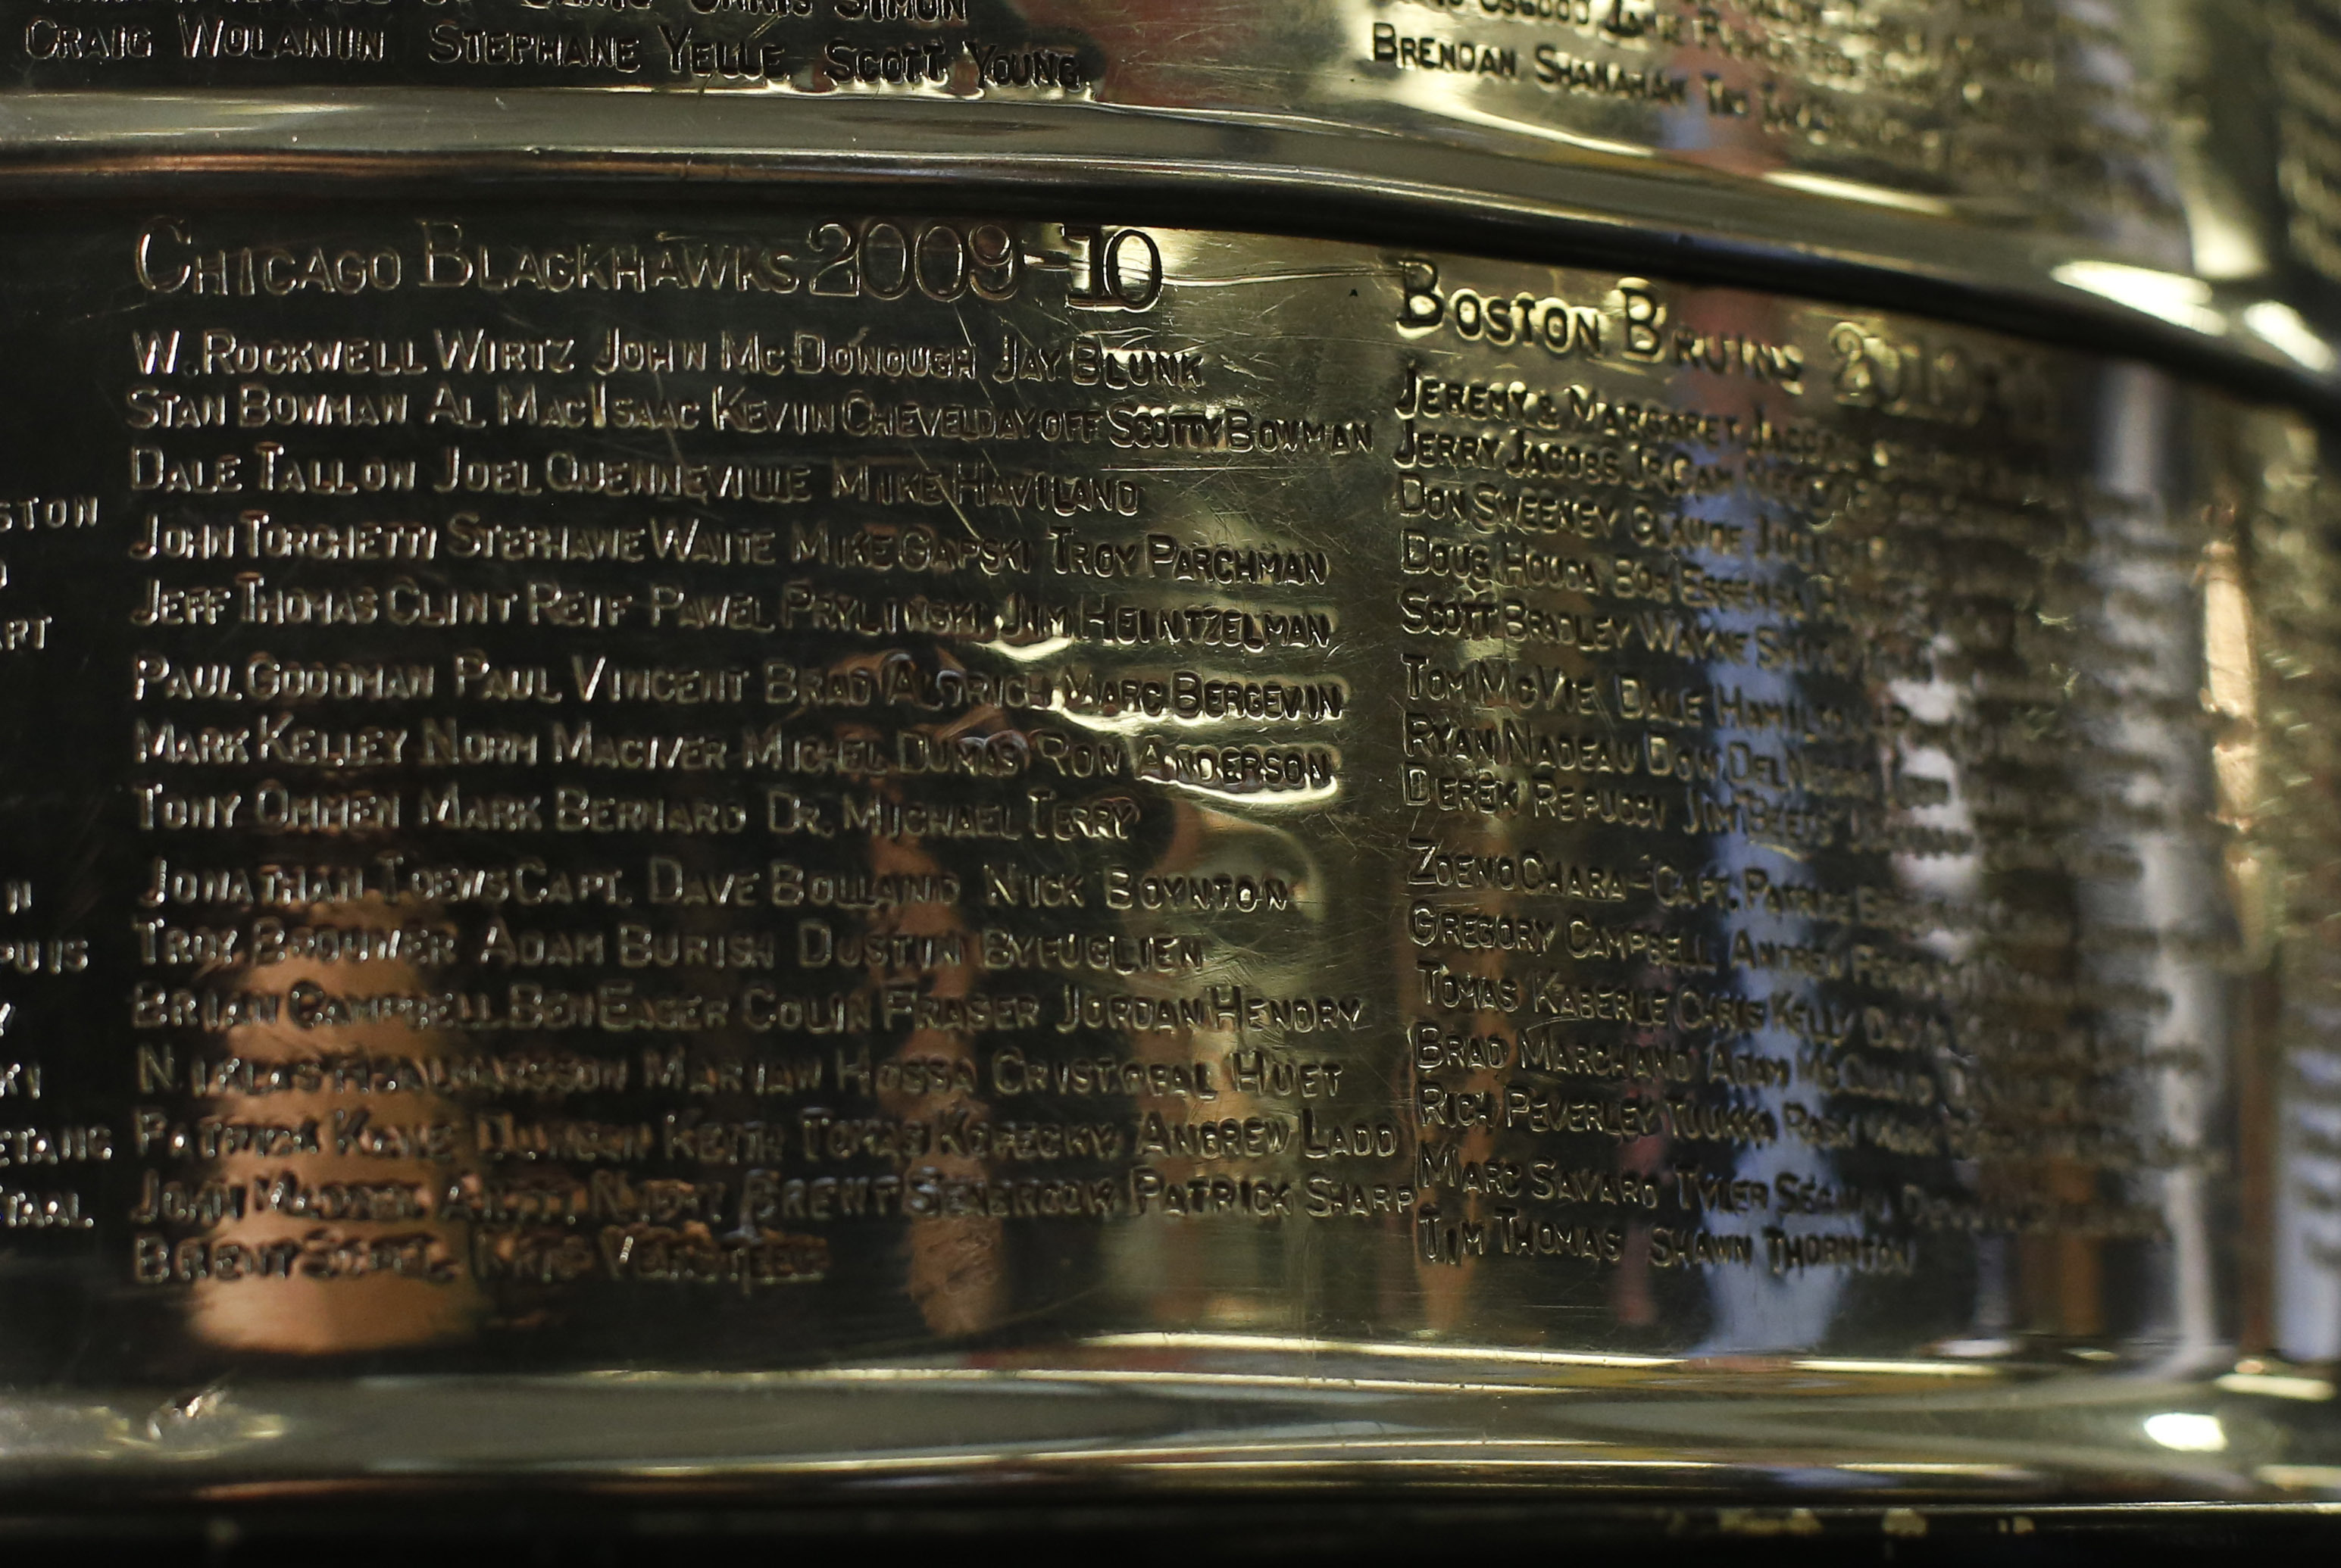 NY Islanders History: An engraved mistake on the Stanley Cup